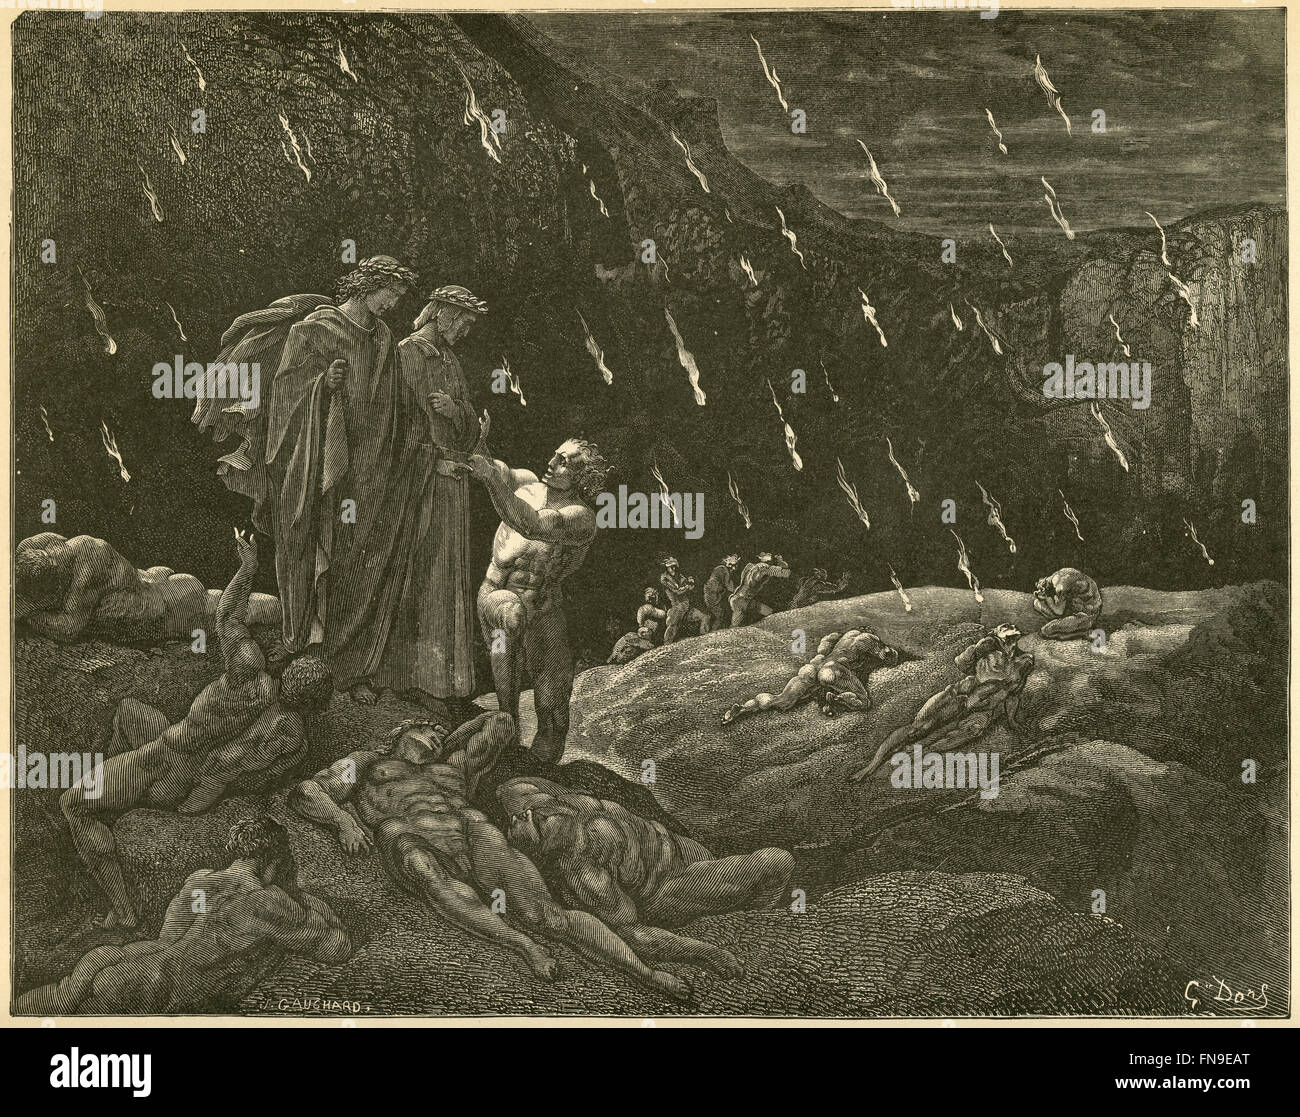 Antique circa 1890 engraving, Dante's Inferno by Gustave Dore, Canto XV Lines 28-29, 'Ser Brunetto! And are ye here?' SOURCE: ORIGINAL ENGRAVING. Stock Photo